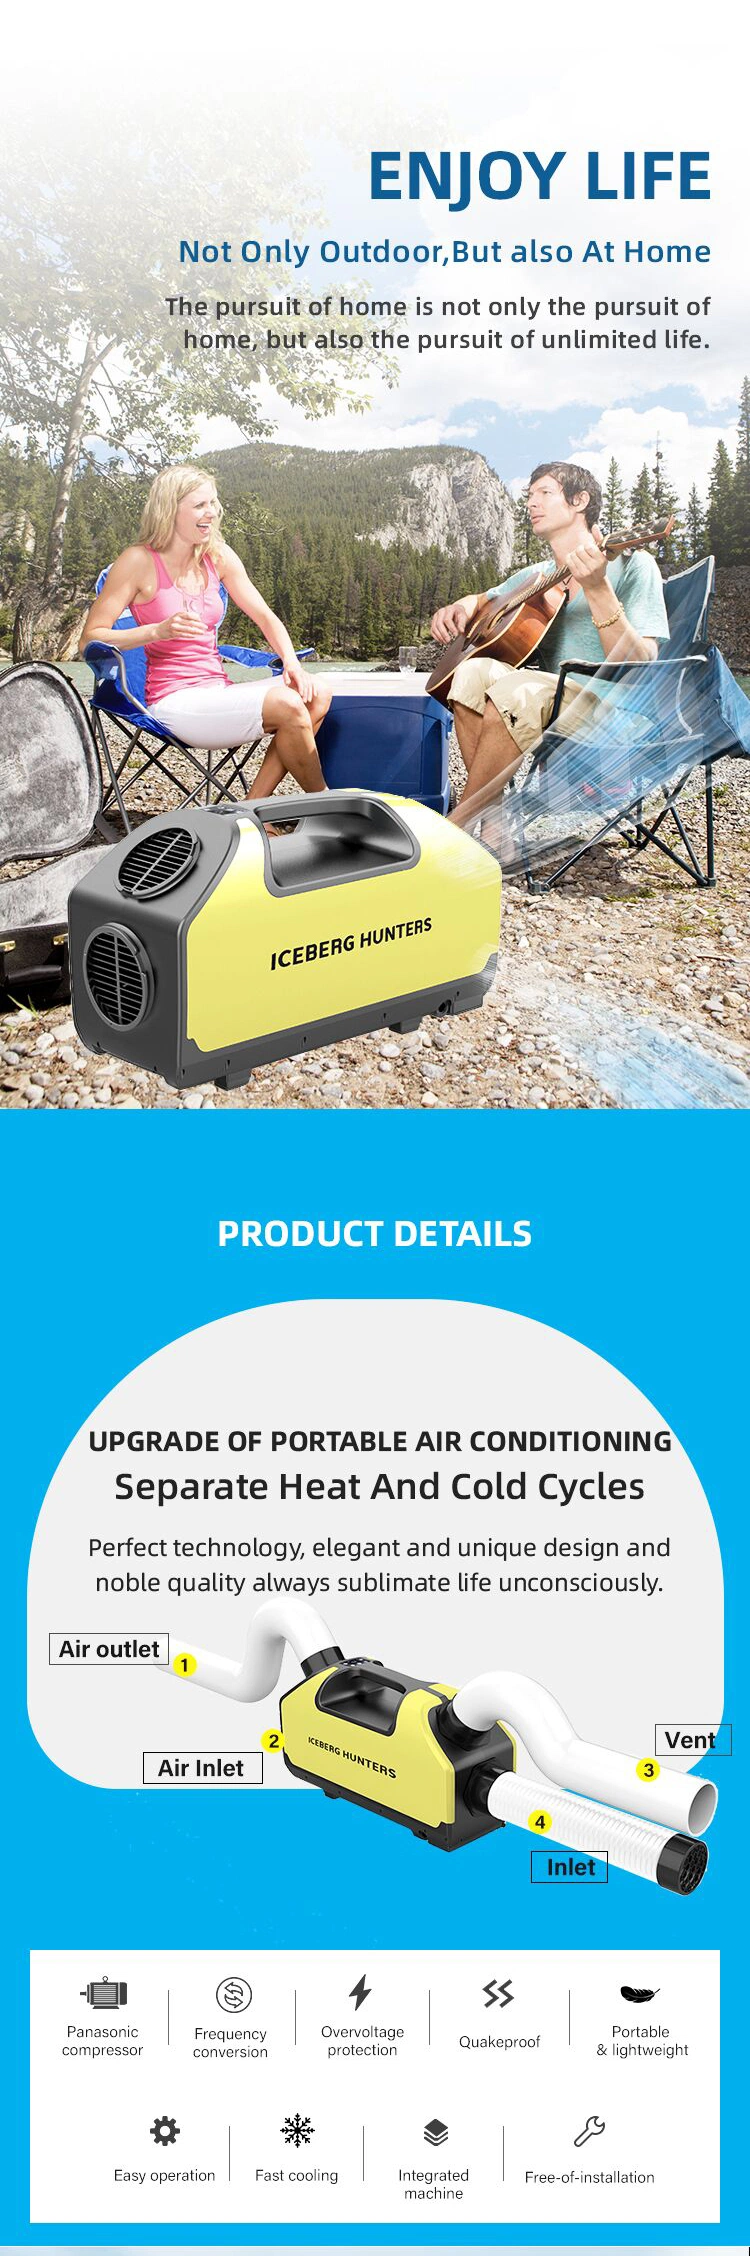 Small Portable Air Conditioner for Camping Iceberg Hunters Camping Air Conditioner